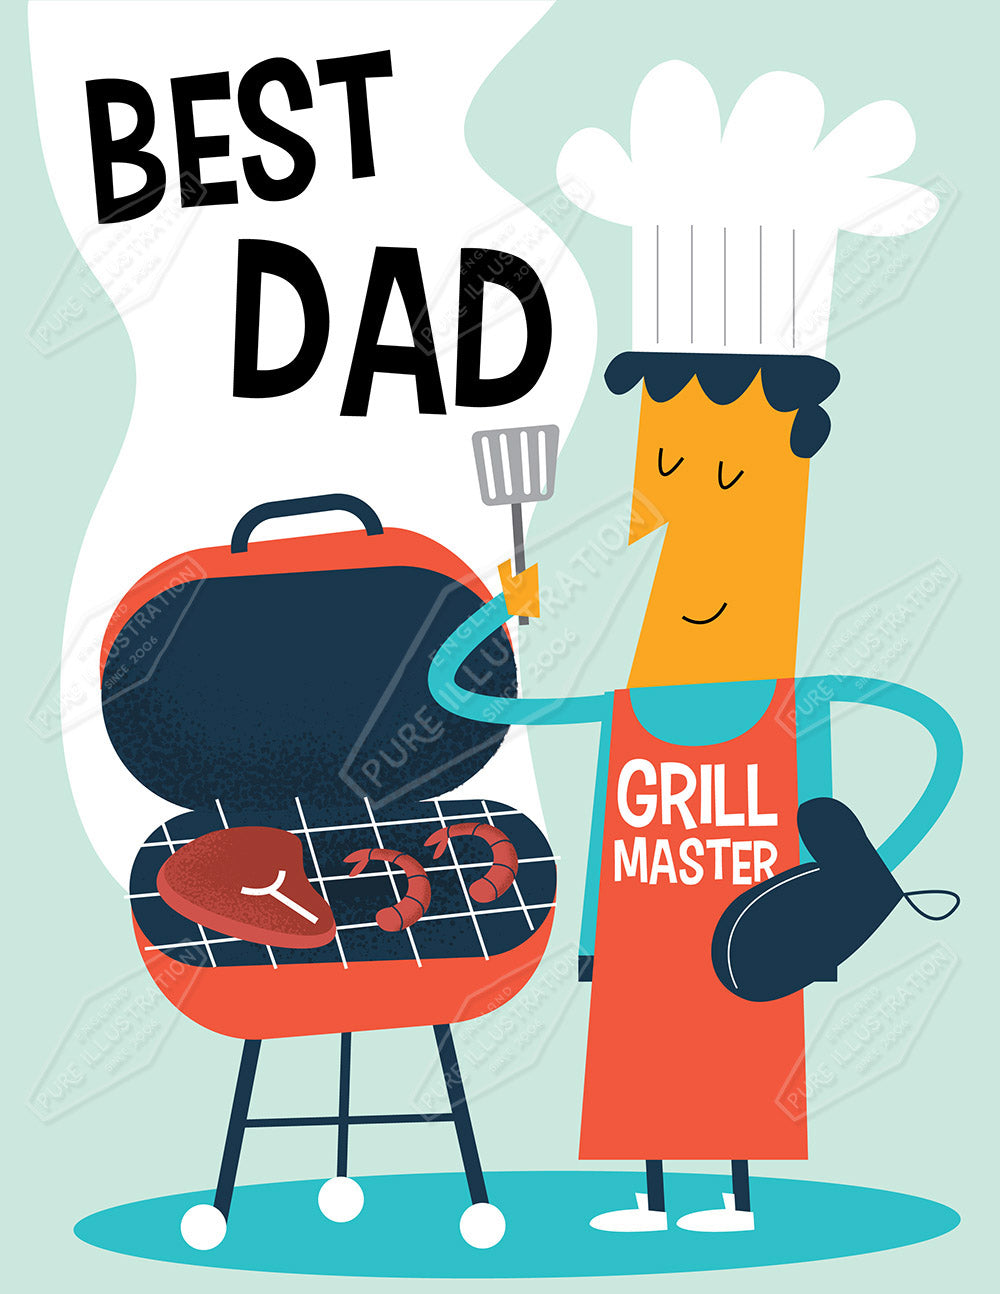 00033435RSW - Luke Swinney is represented by Pure Art Licensing Agency - Father's Day Greeting Card Design